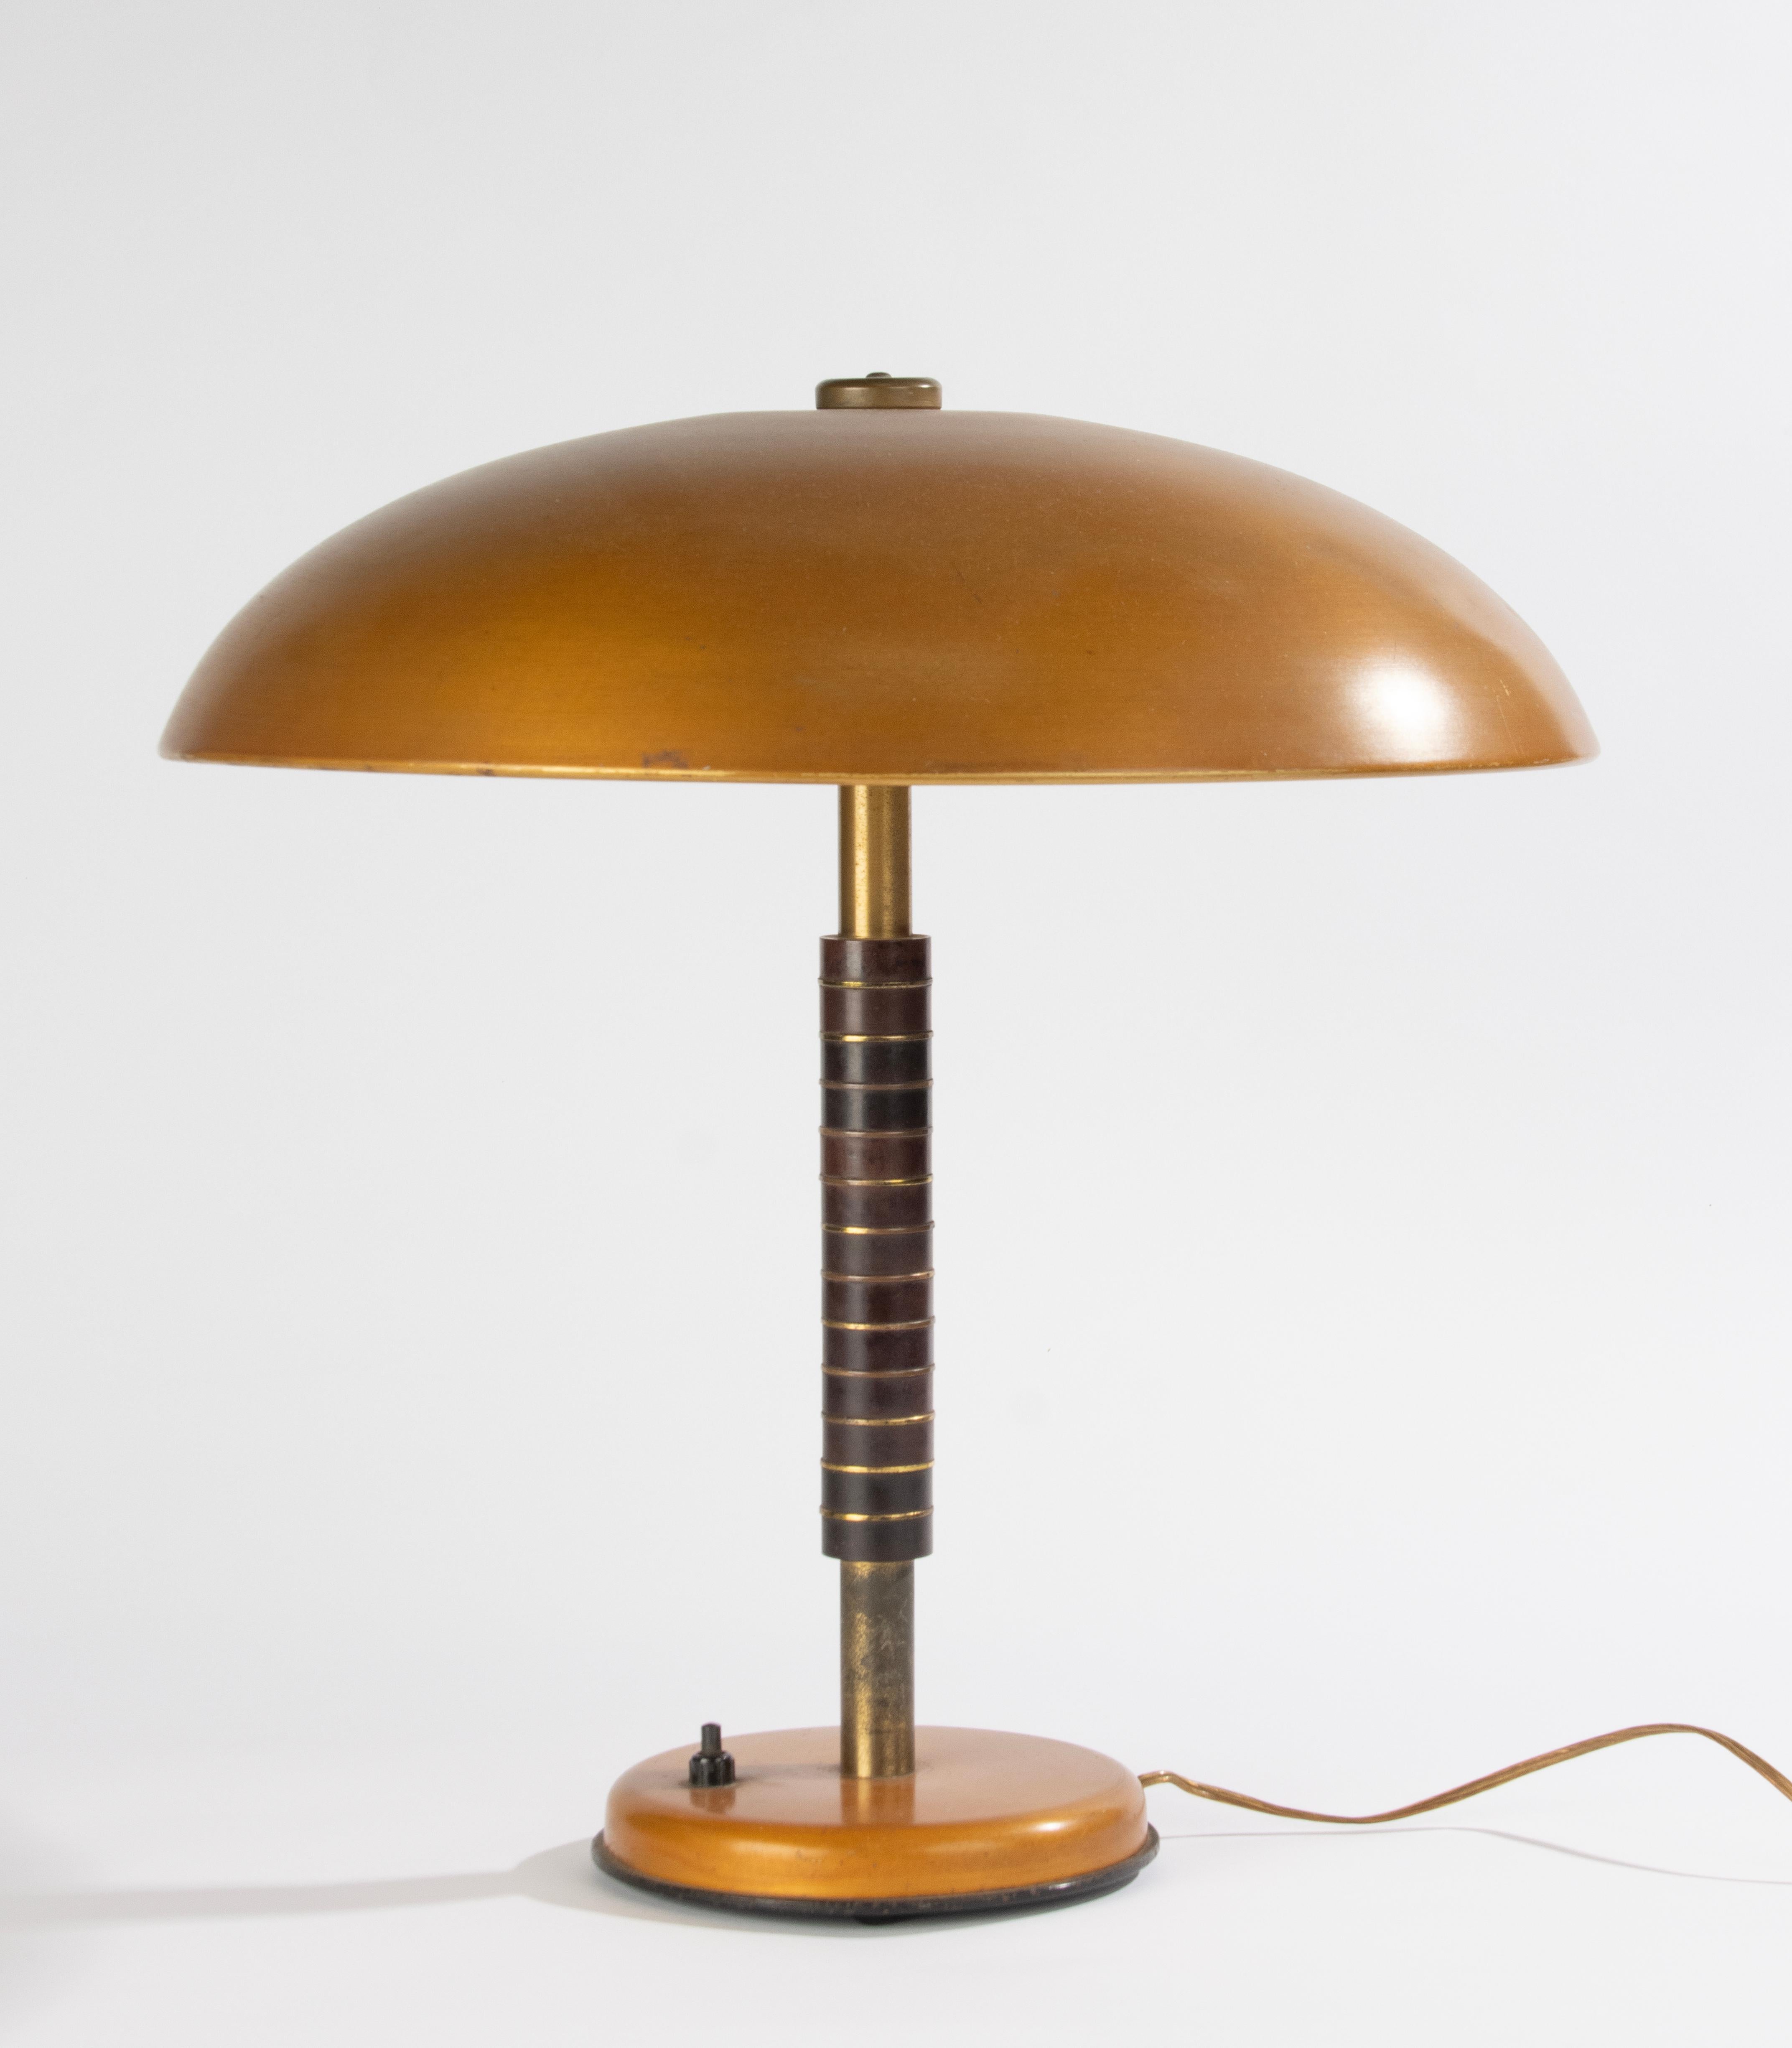 Hand-Crafted Vintage Bauhaus Table Lamp - 1940's - Bakelite and Metal  For Sale